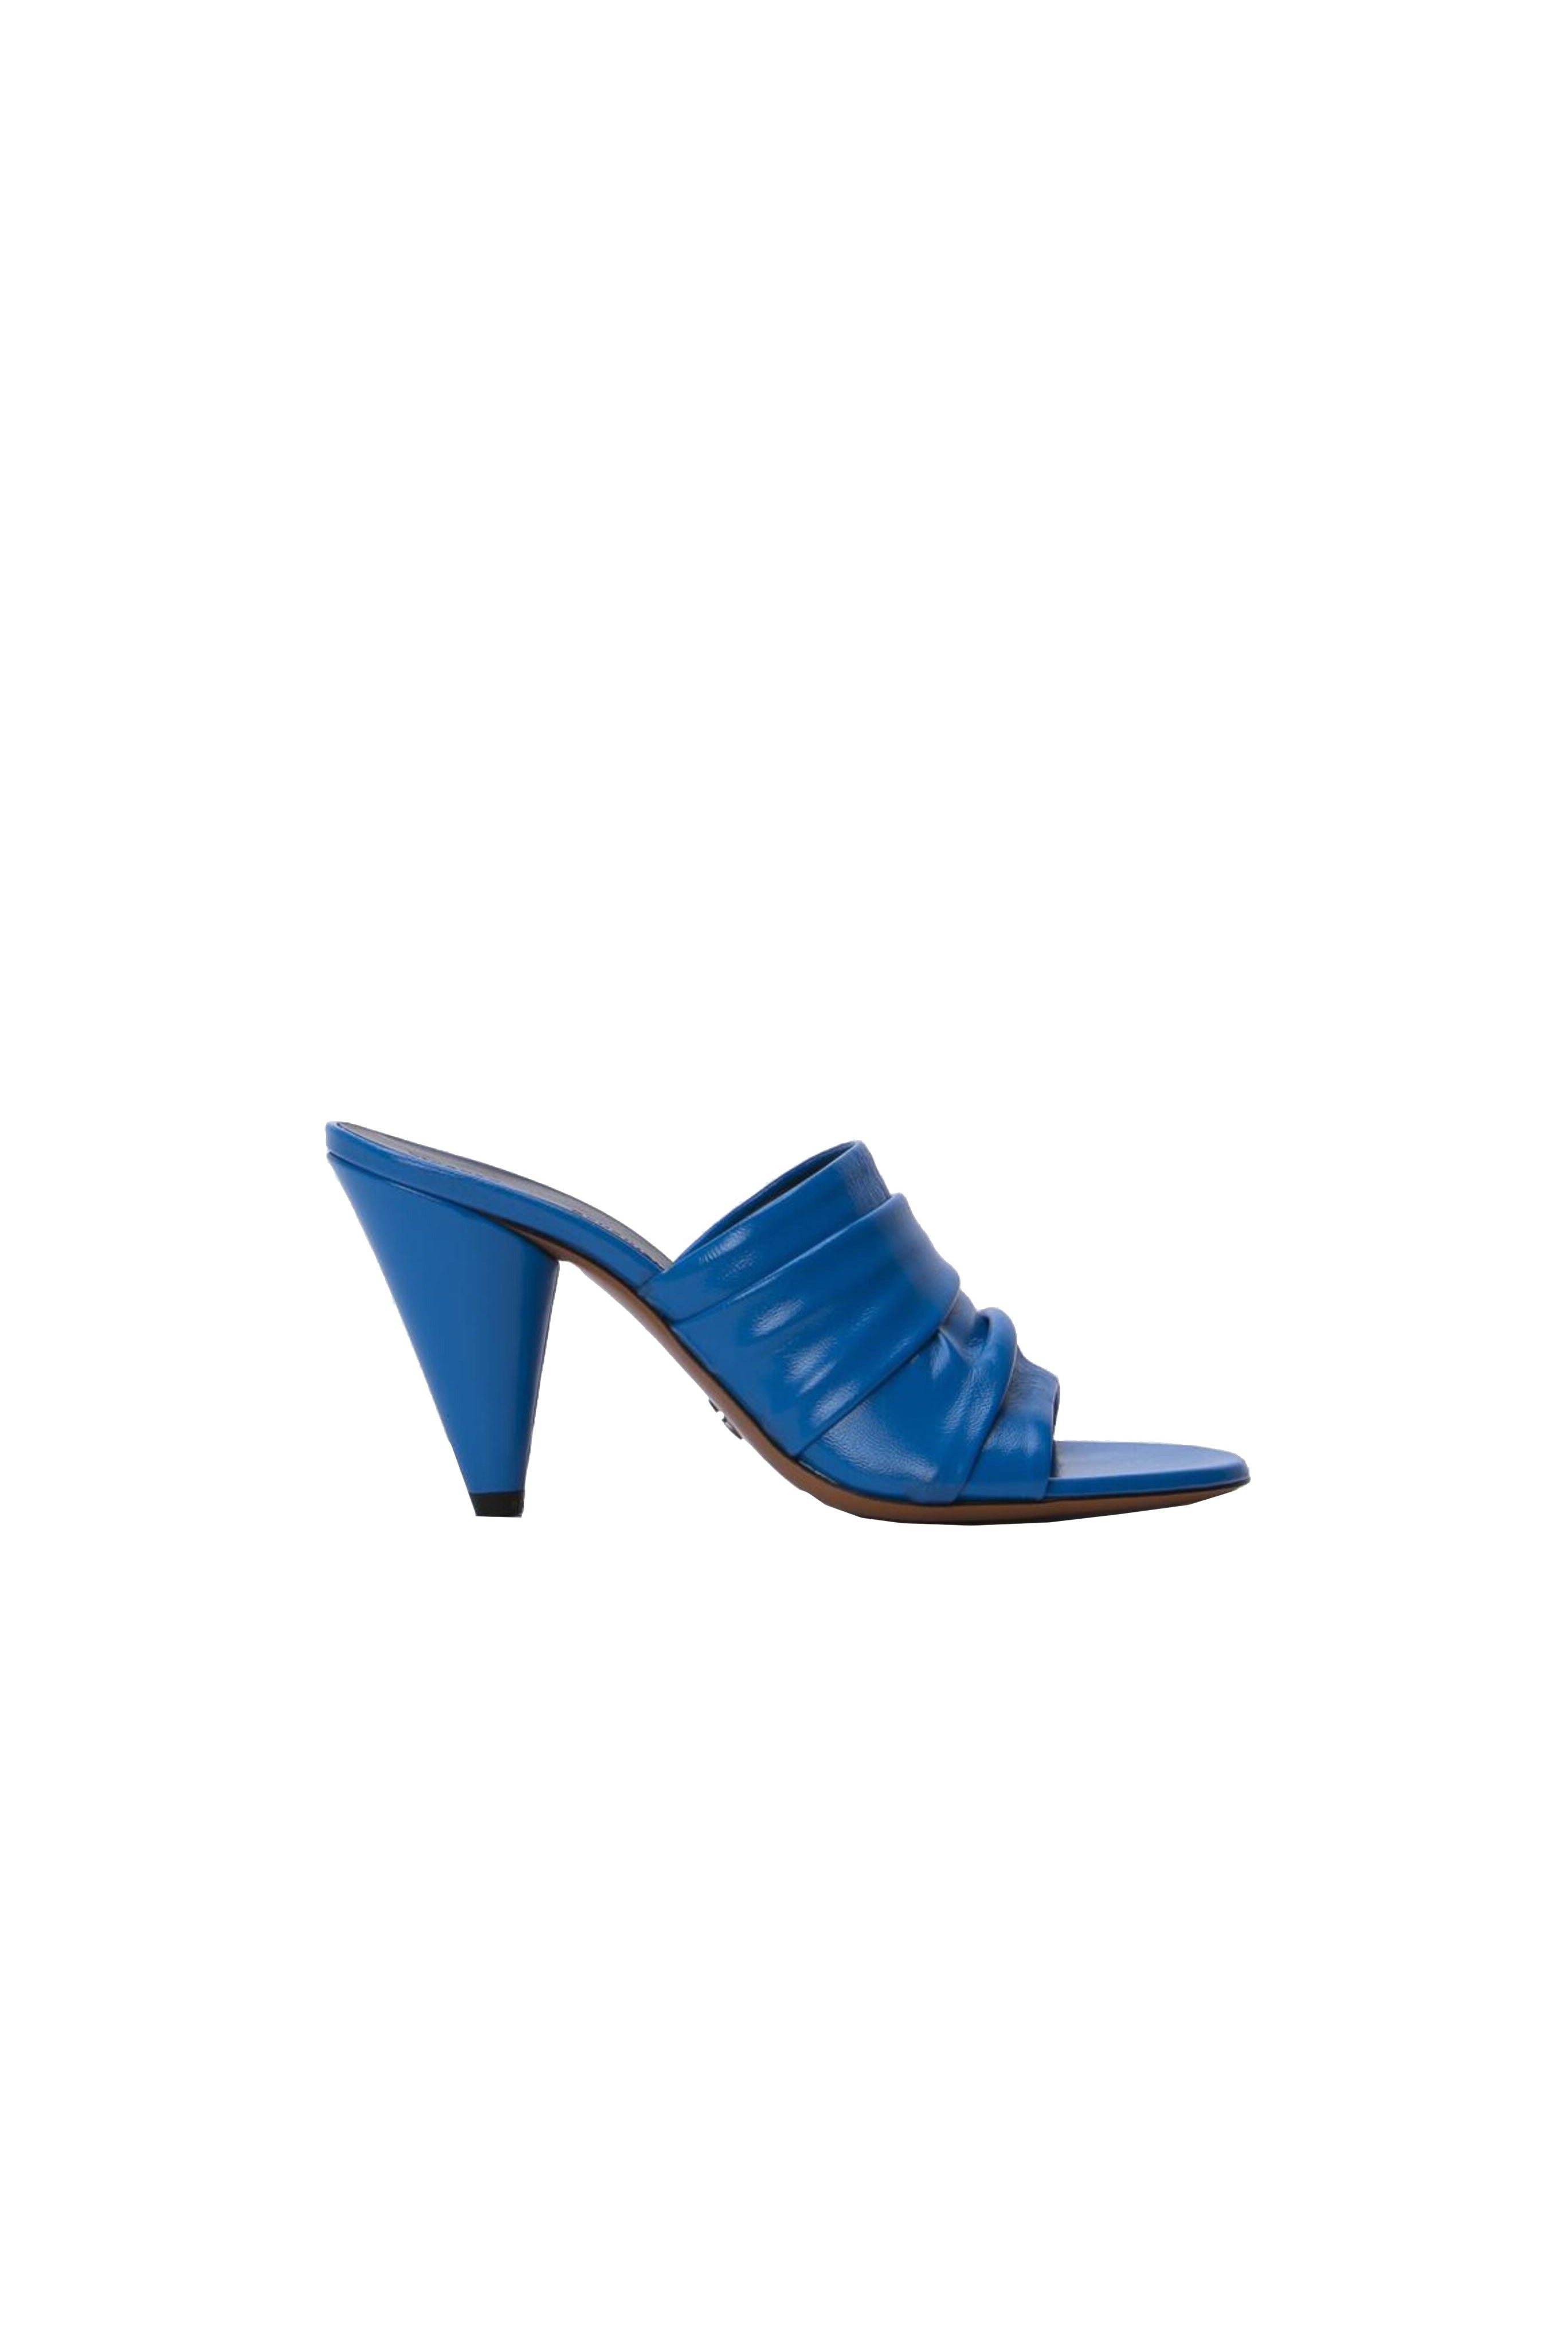 PROENZA SCHOULER Gathered Cone Blue Leather Sandals